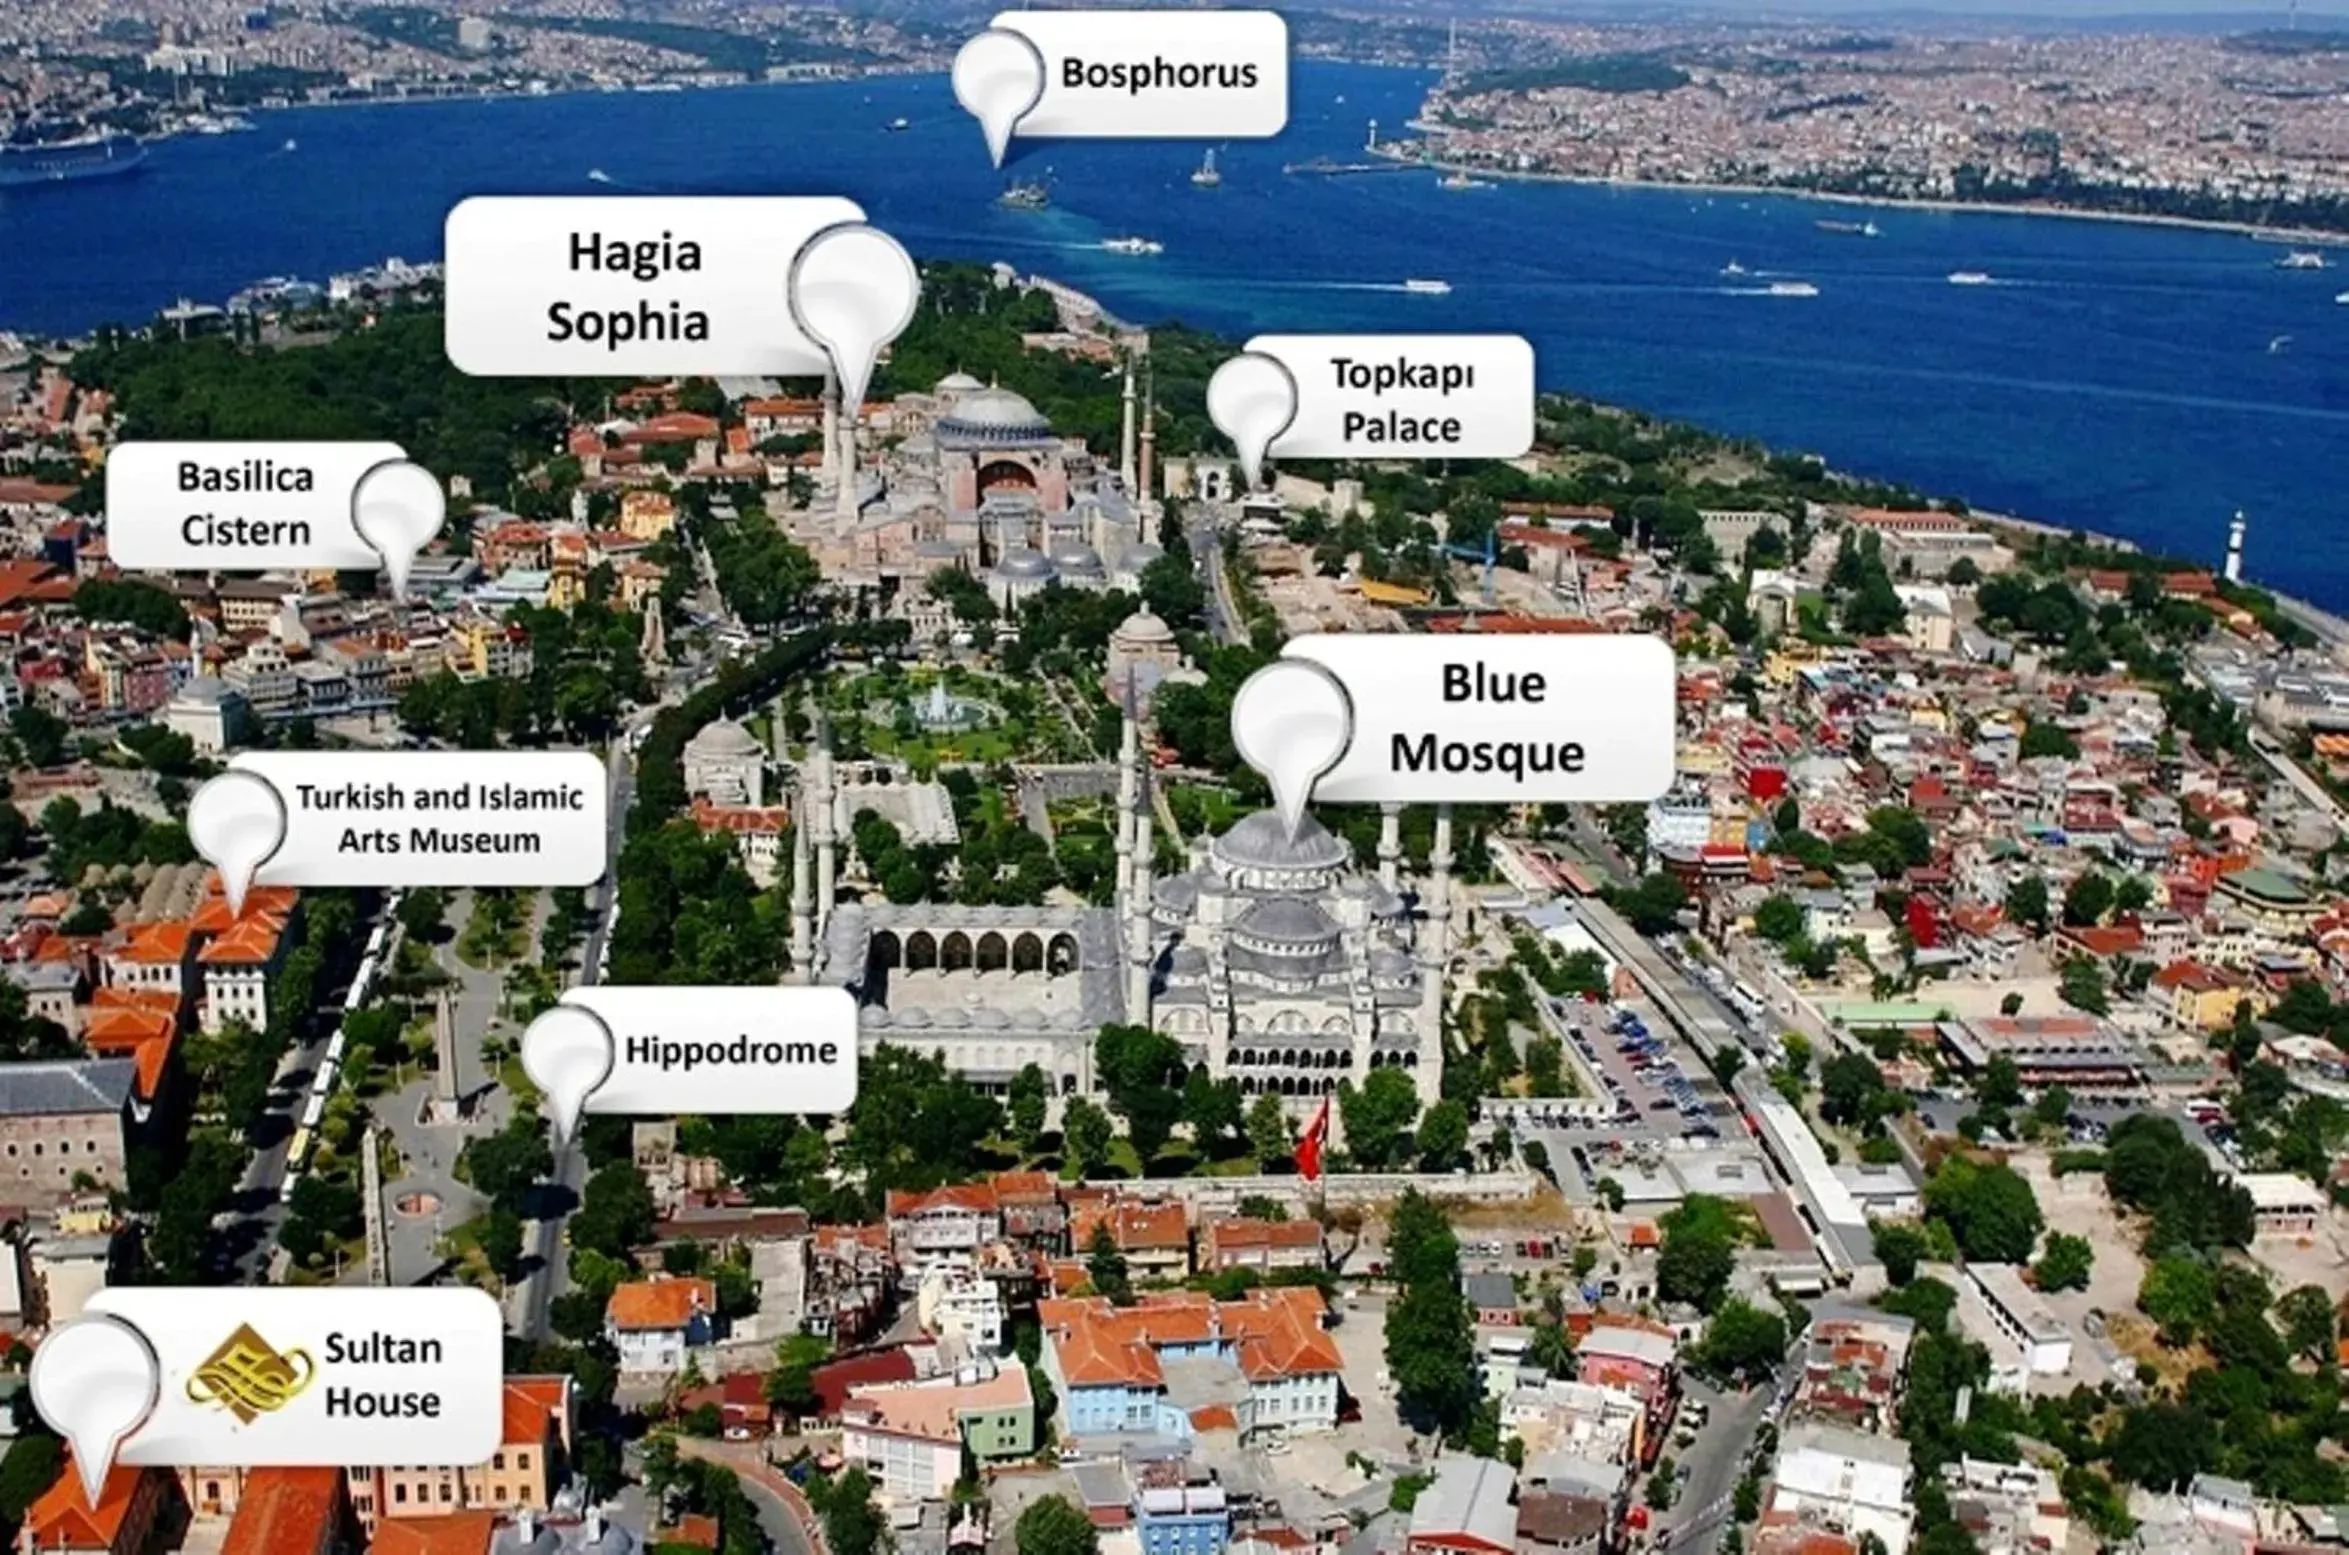 Area and facilities, Bird's-eye View in Sultan House